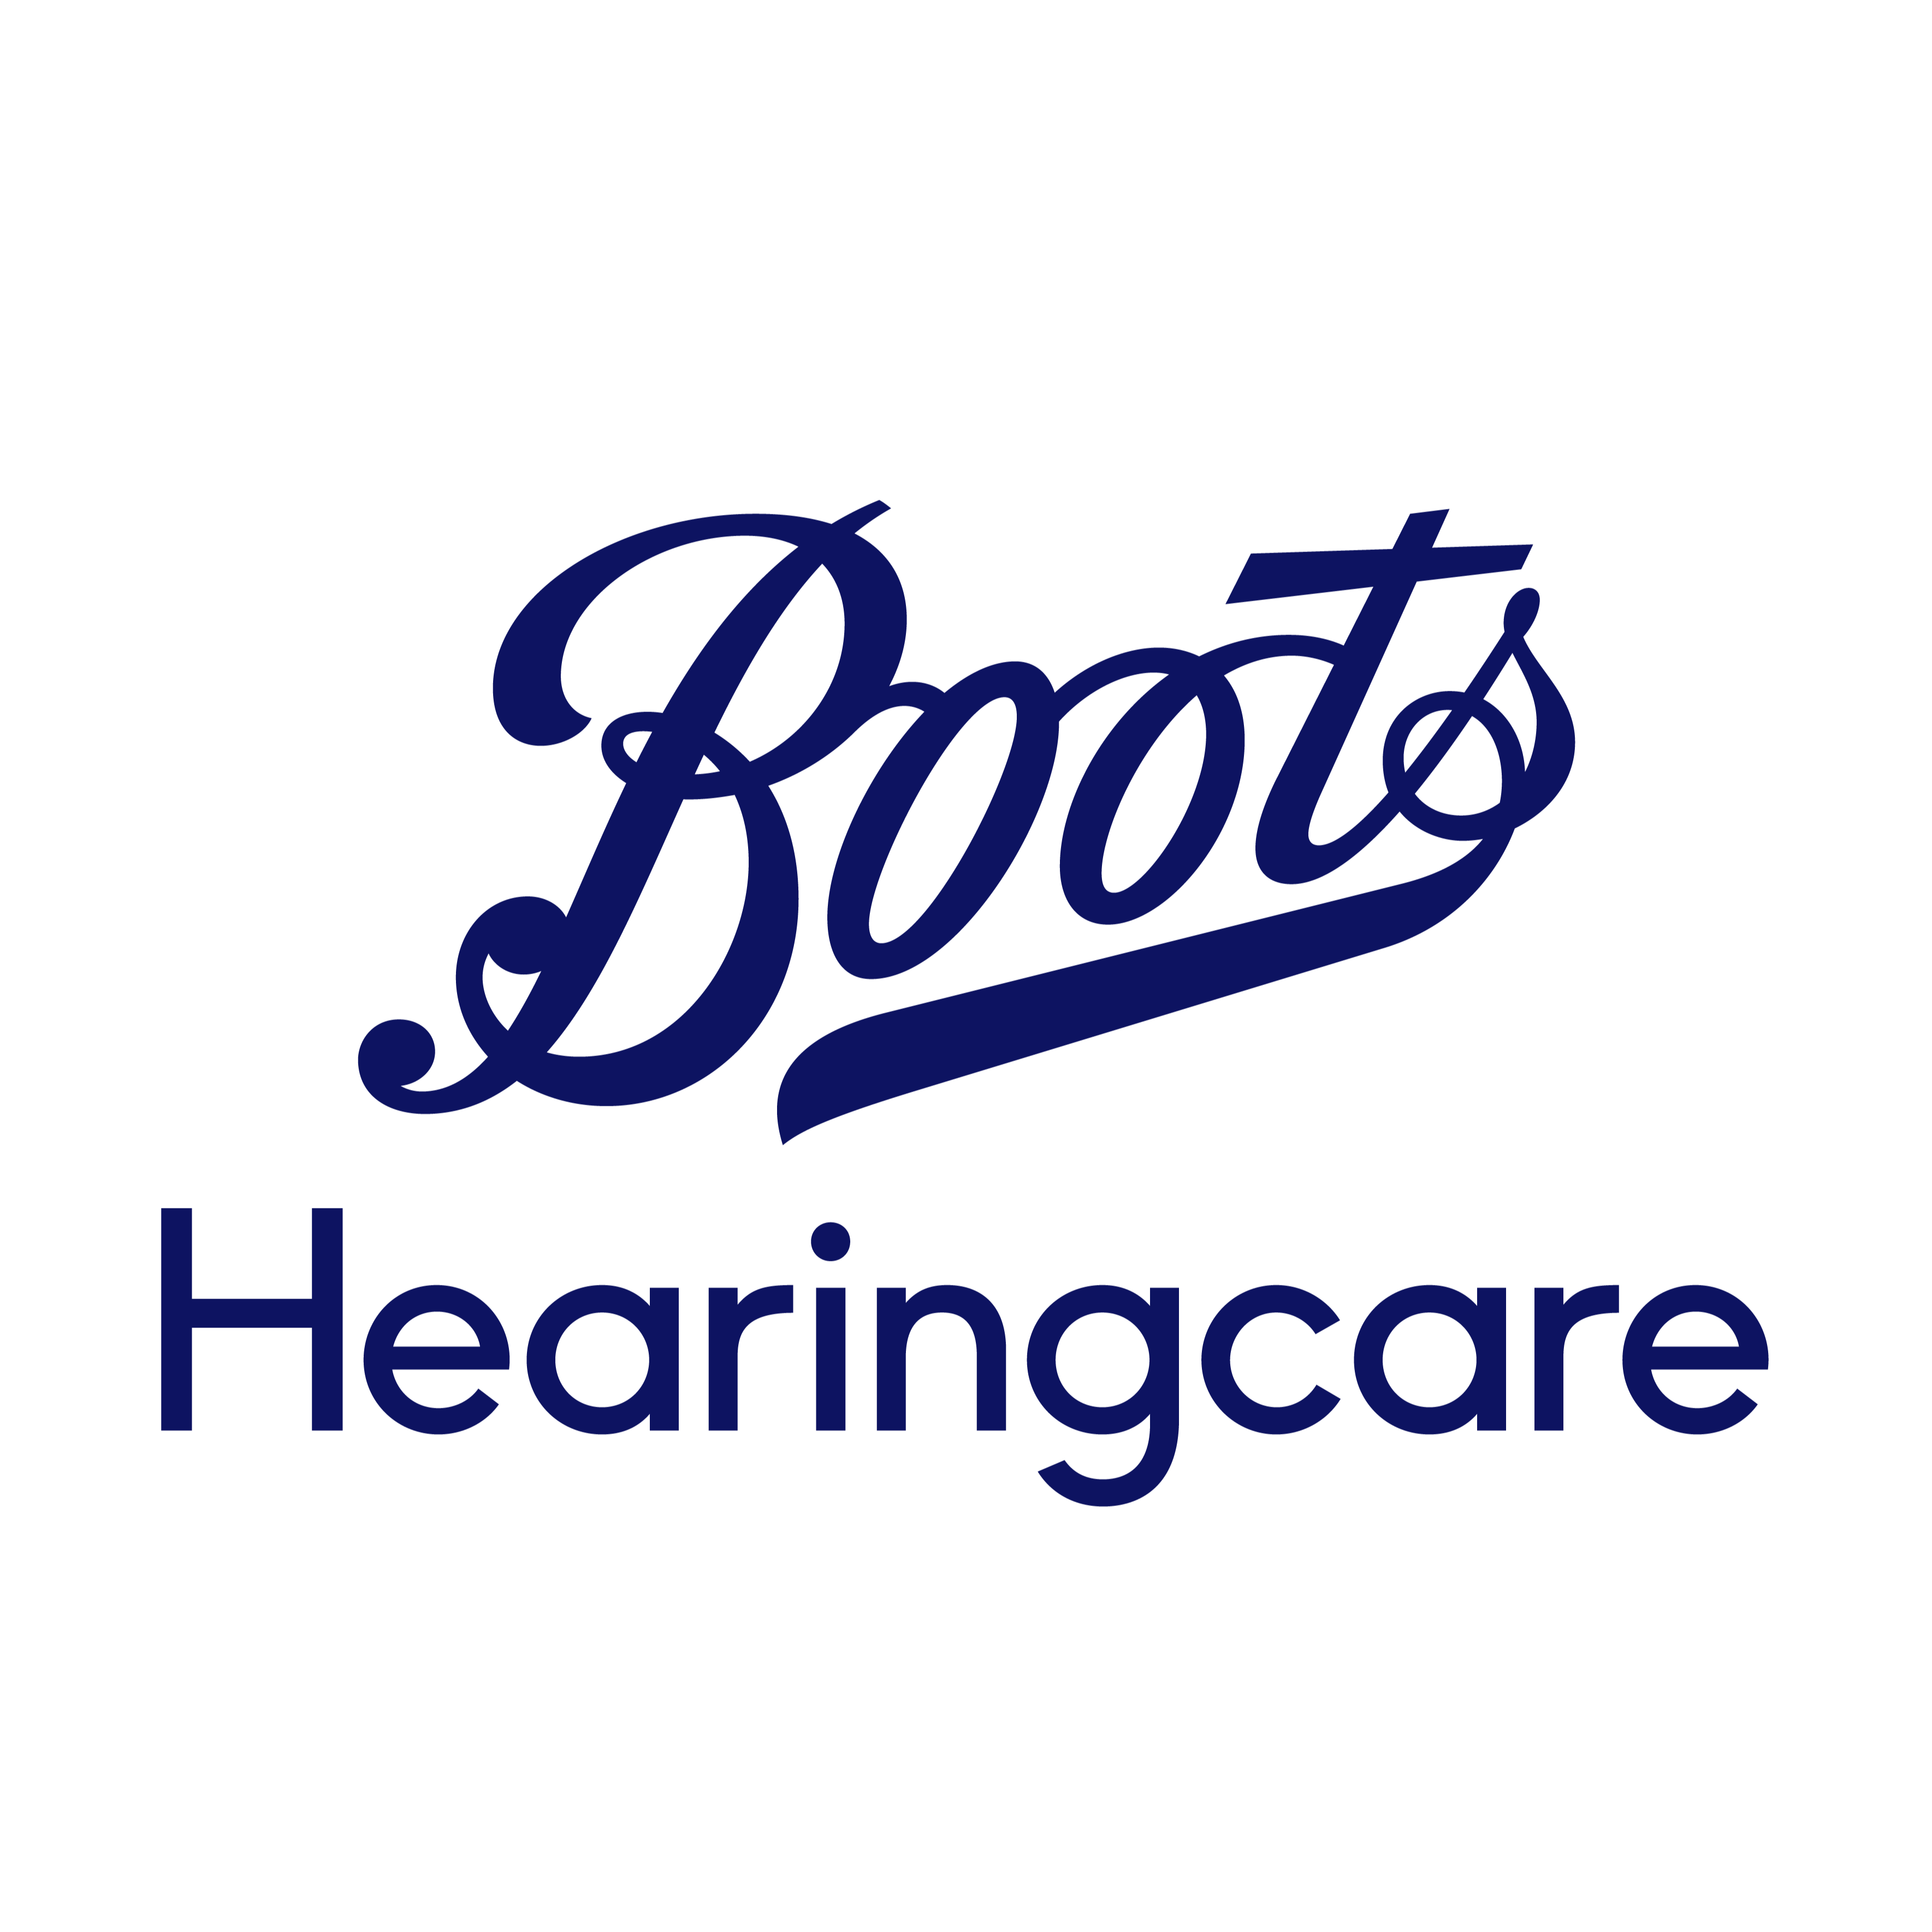 Boots Hearingcare Chelmsford (World Of Hearing) - Chelmsford, Essex CM1 1XG - 03452 701600 | ShowMeLocal.com